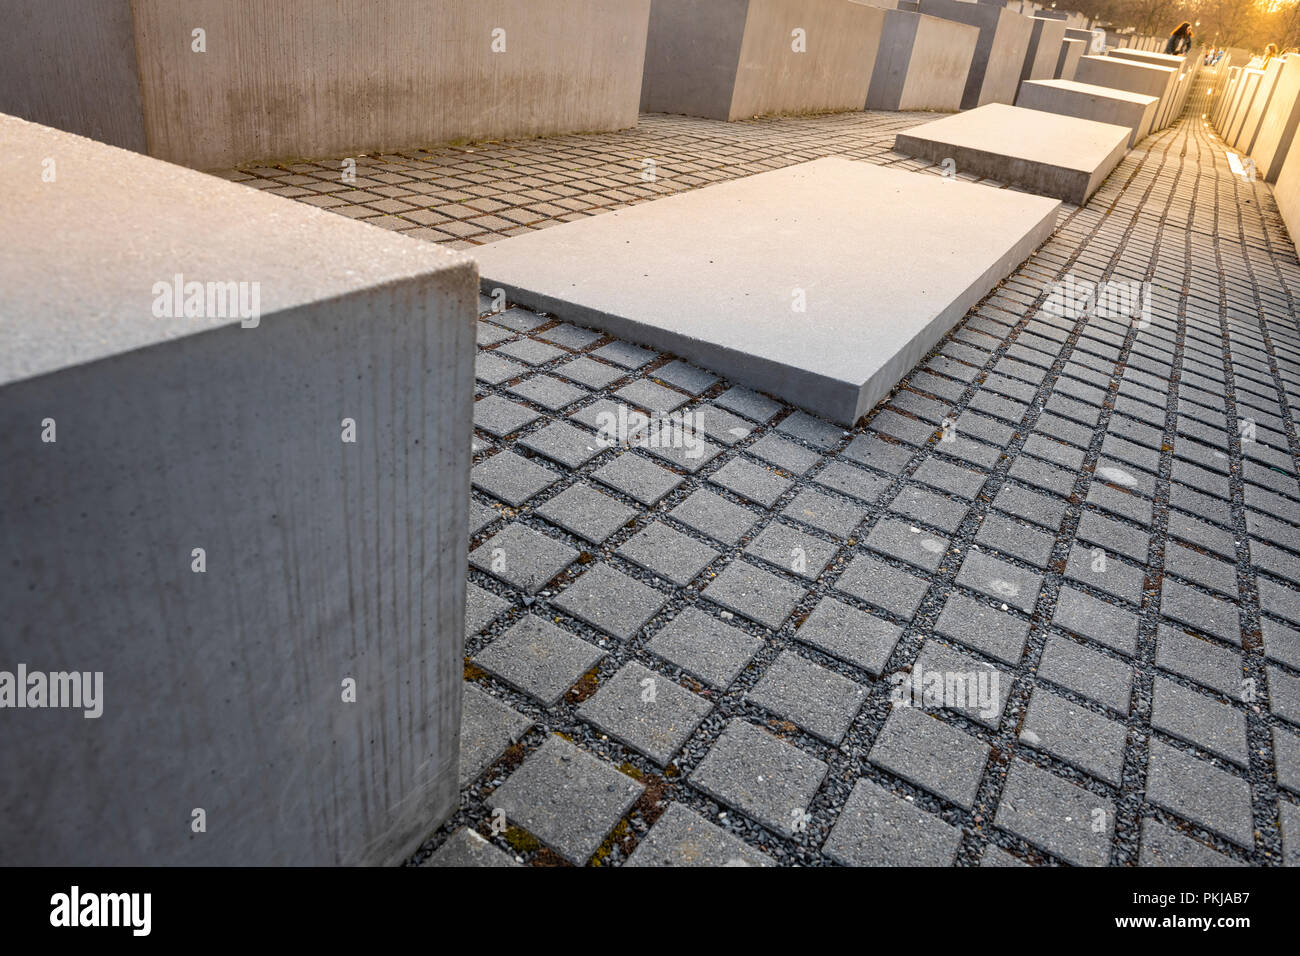 The Holocaust Memorial in Berlin is a memorial to the murdered Jews of Europe, designed by architect Peter Eisenman and engineer Buro Happold. Stock Photo